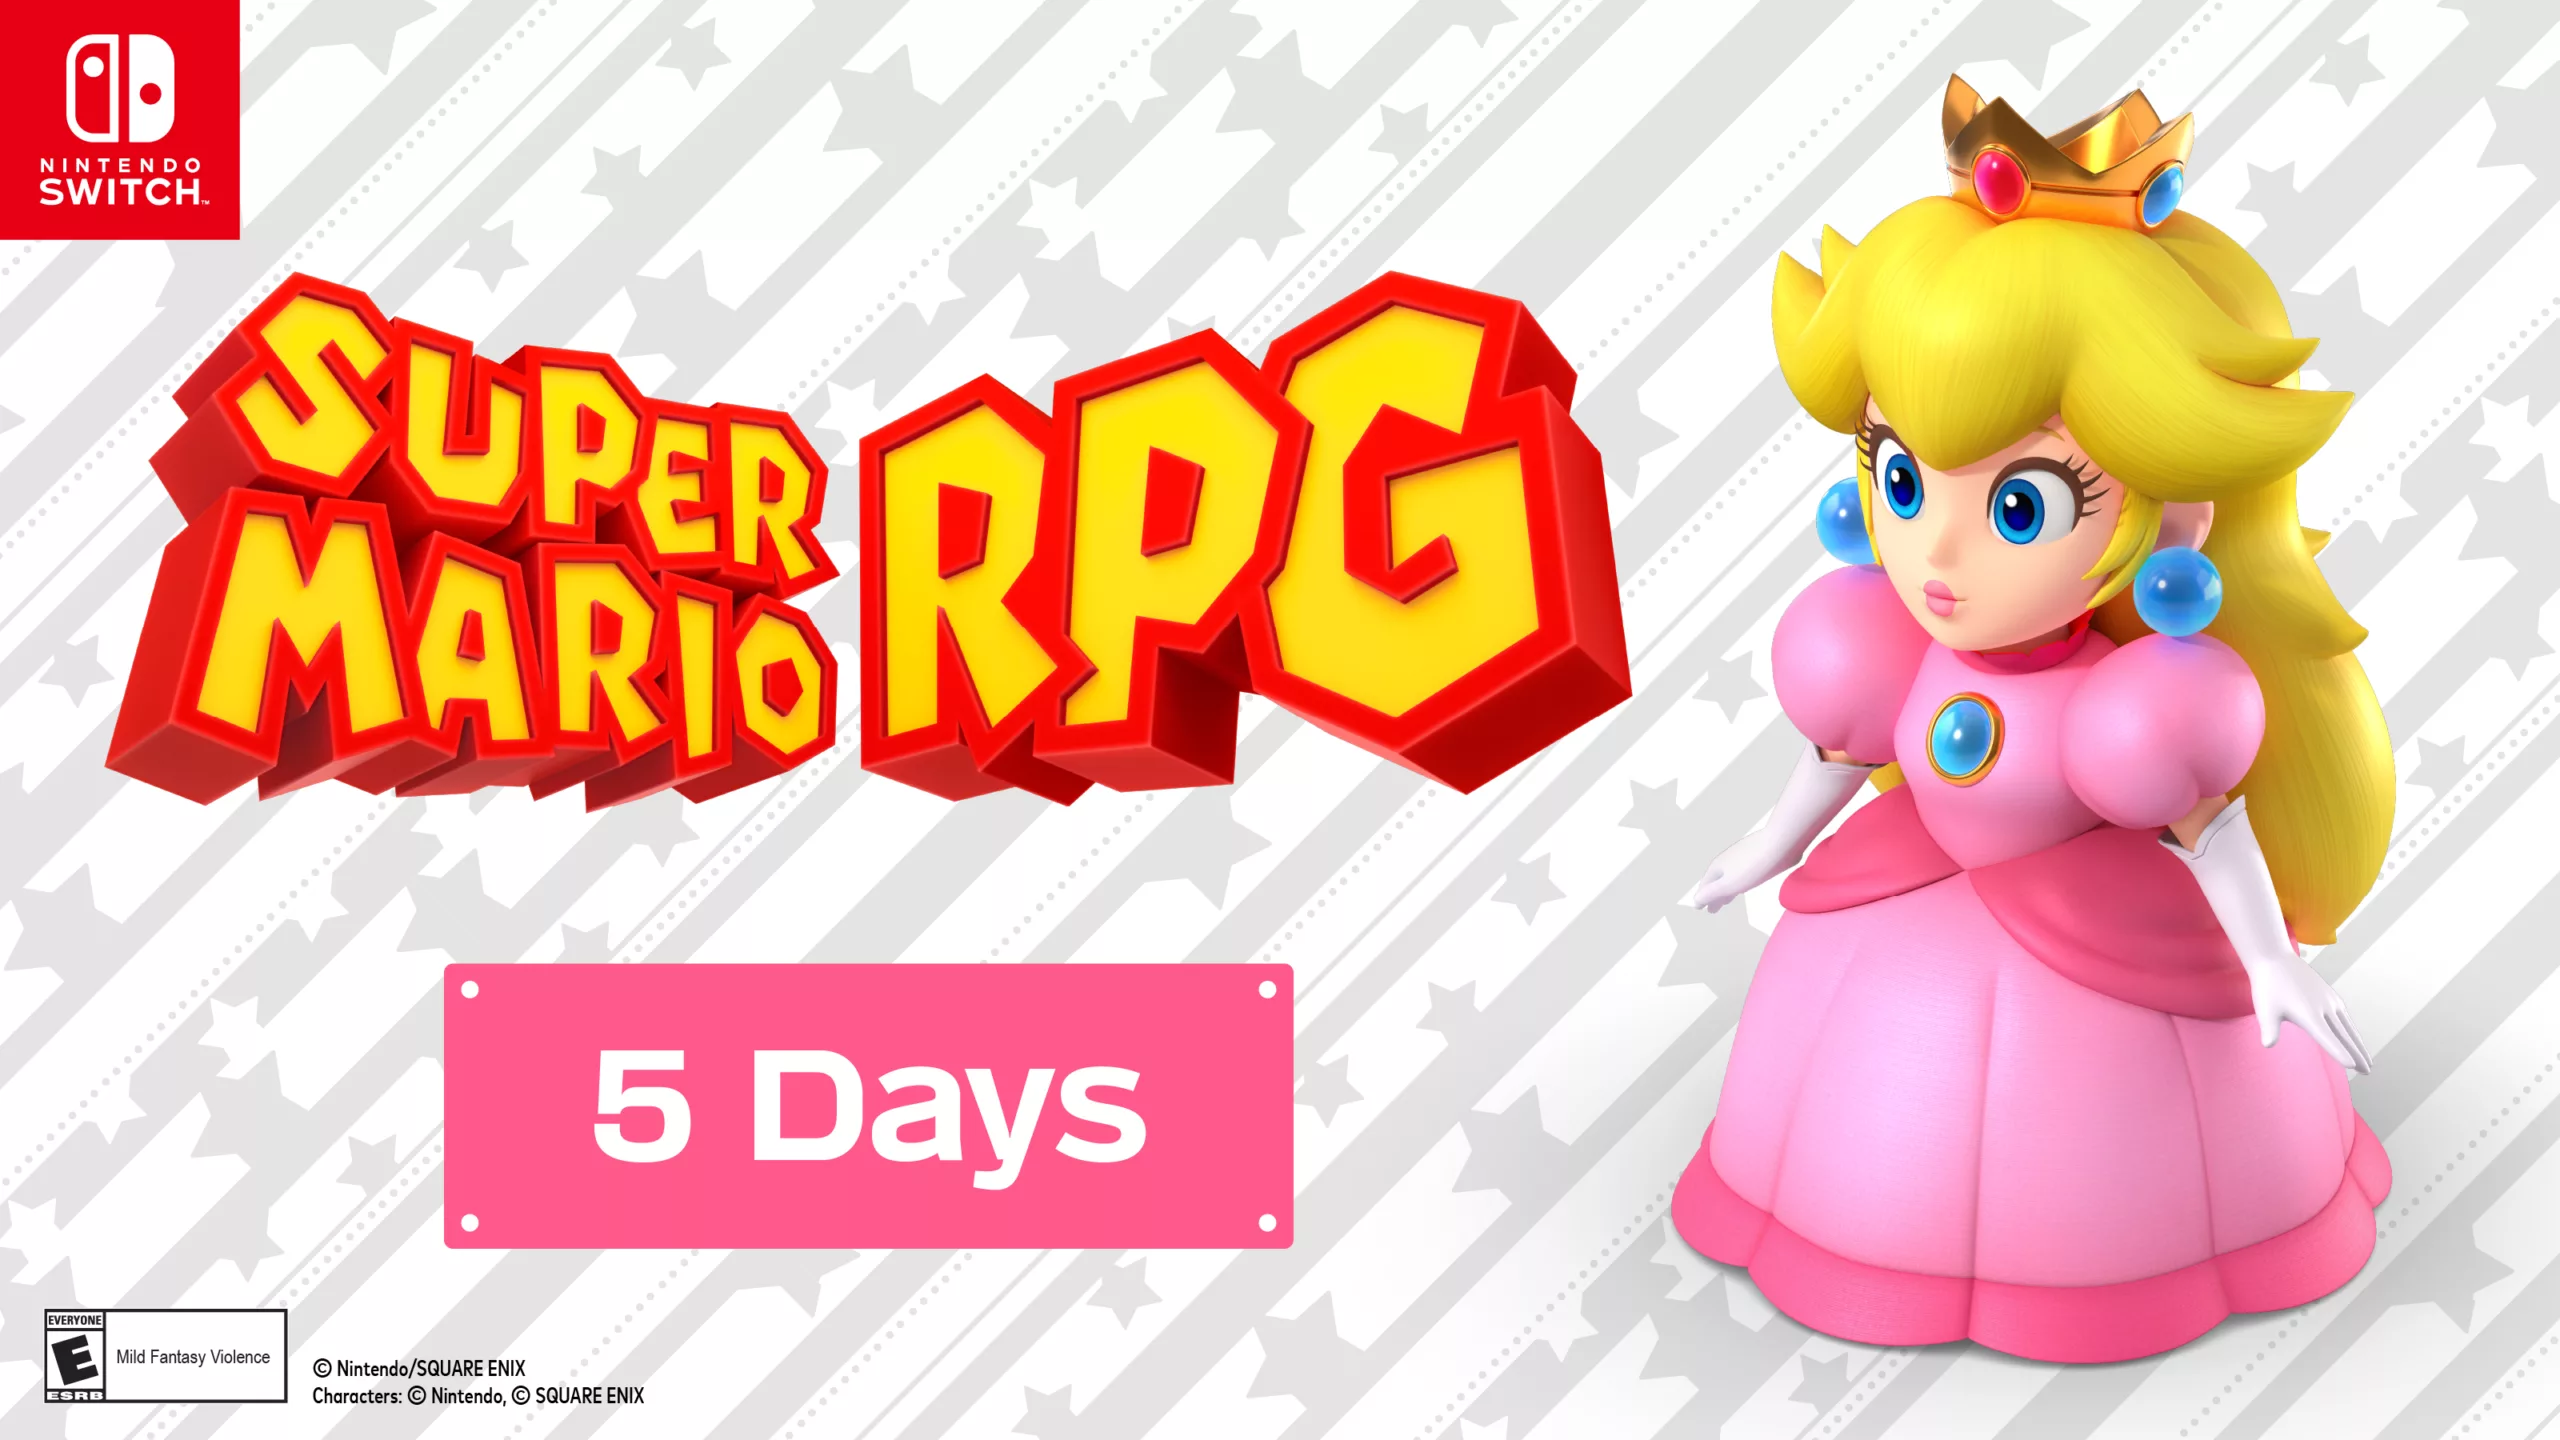 Nintendo Reminds Everyone that Super Mario RPG Launches on Friday; Special Event at Nintendo New York